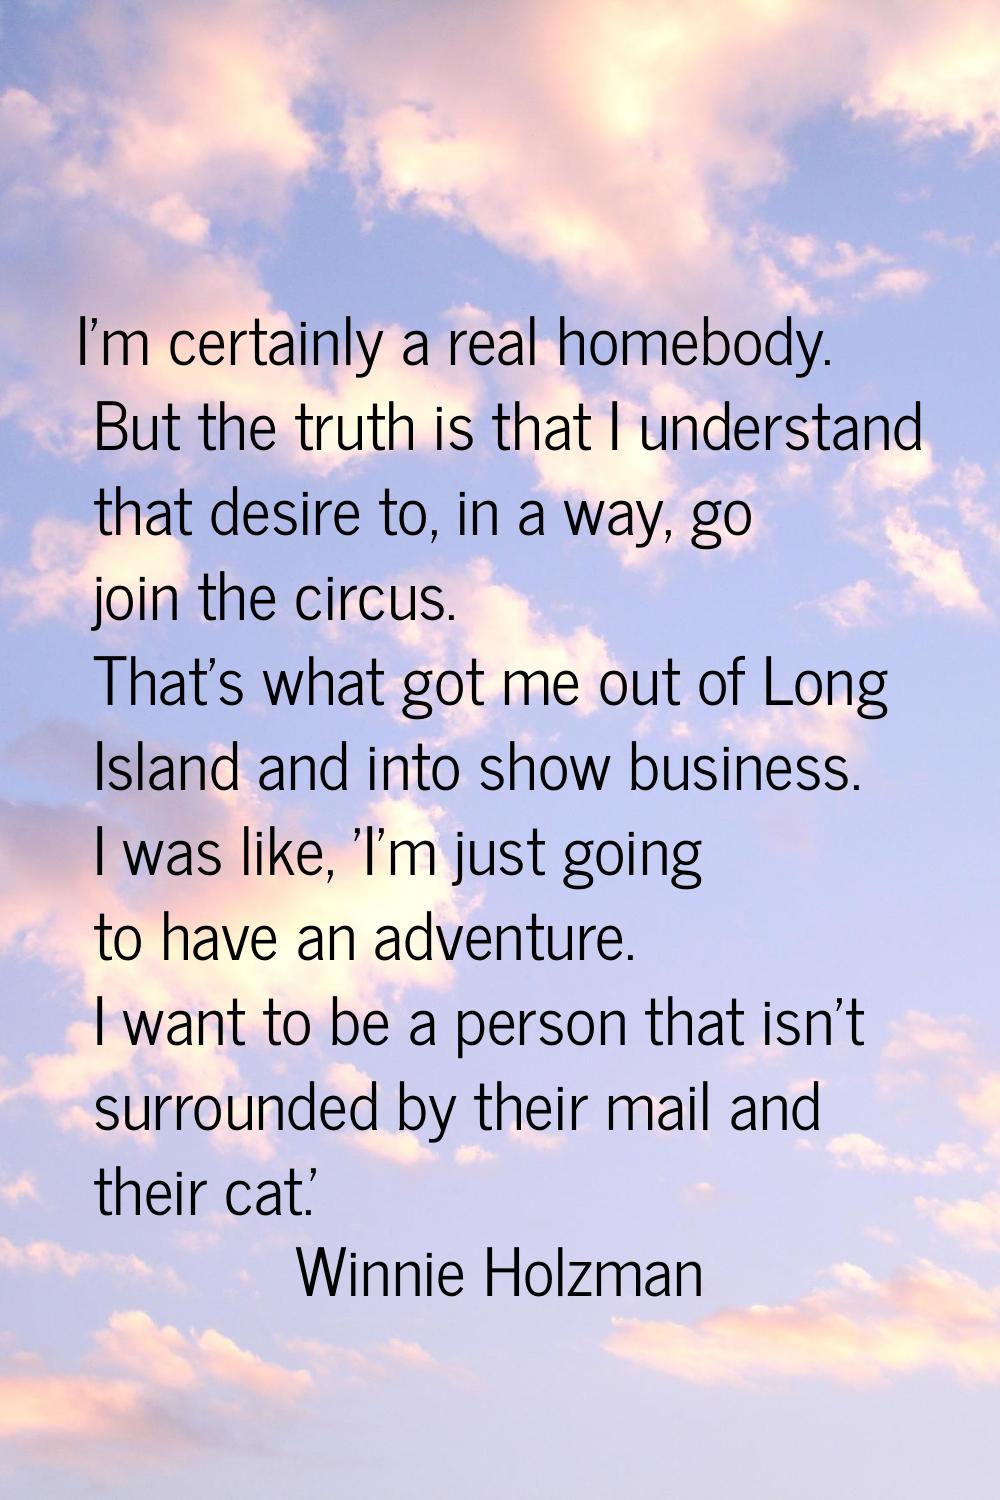 I'm certainly a real homebody. But the truth is that I understand that desire to, in a way, go join